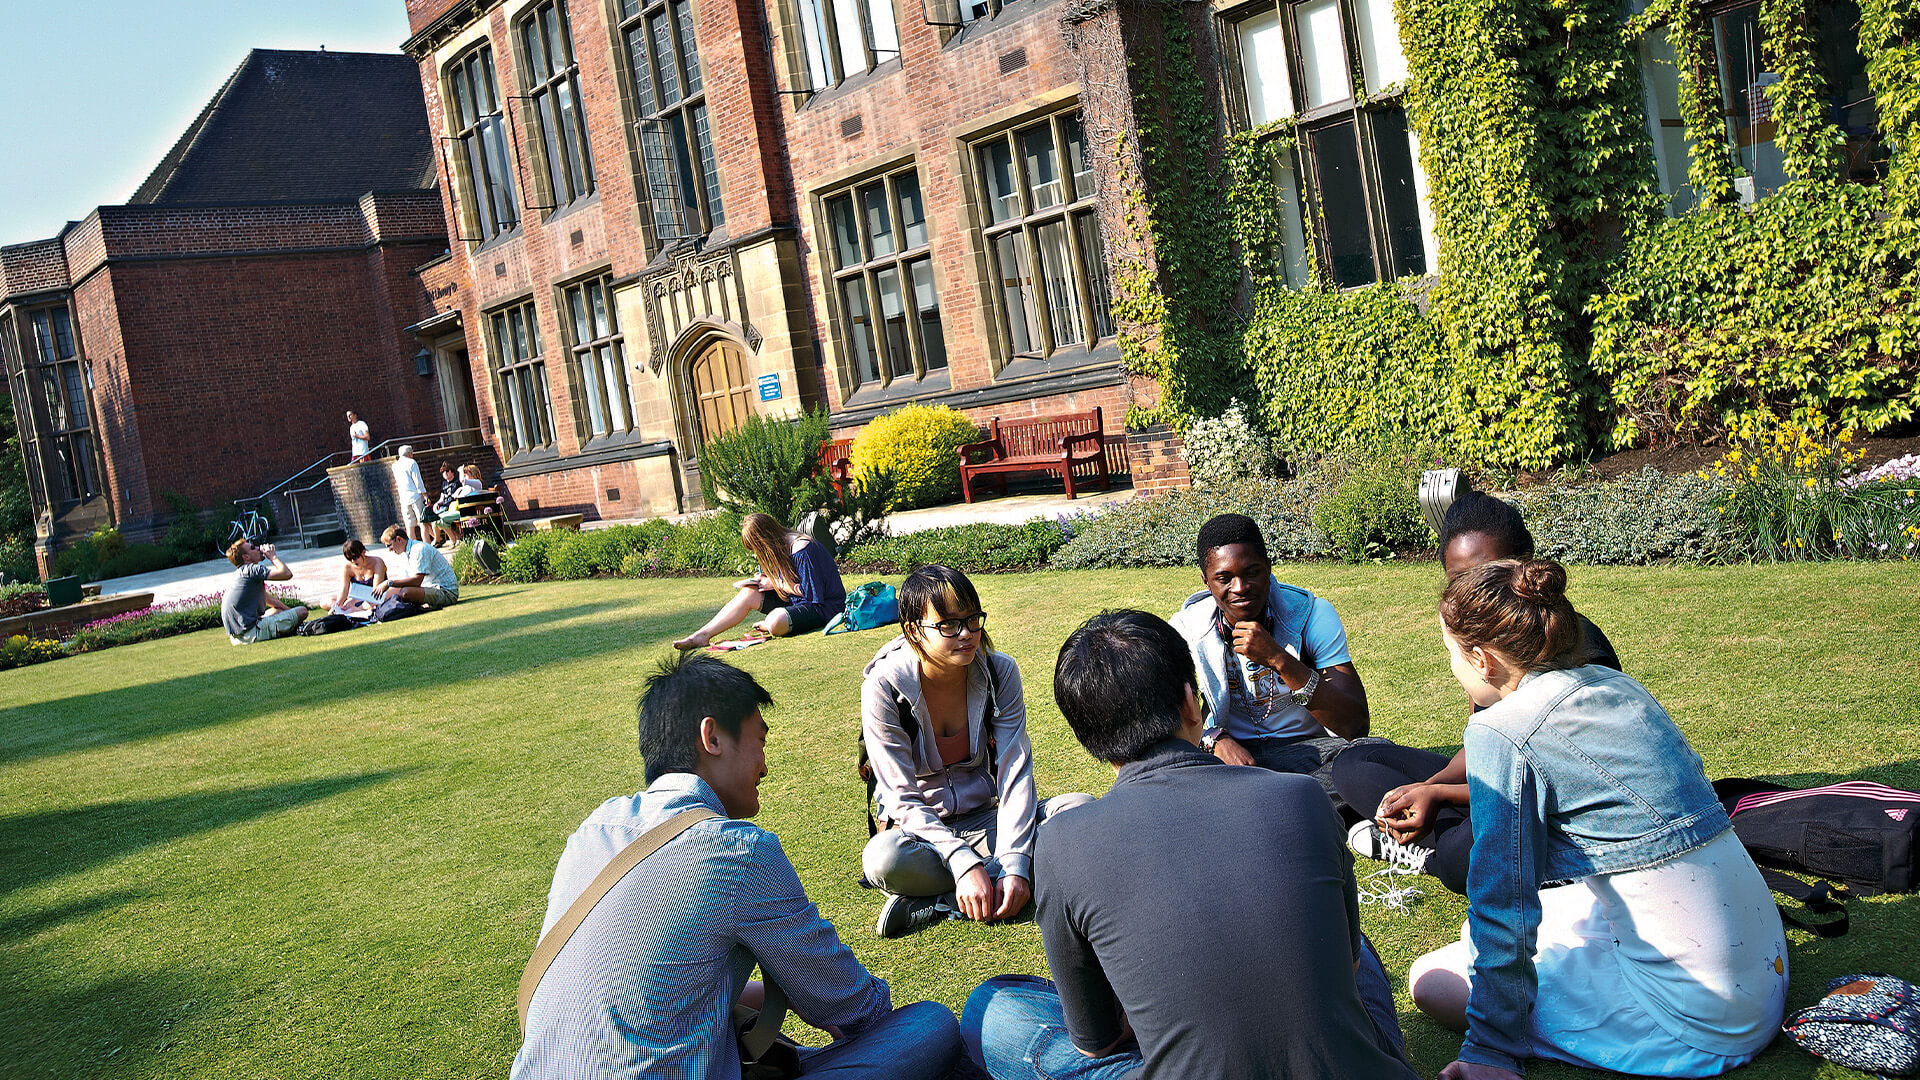 Students socialising outside on the lawn on the Newcastle University campus